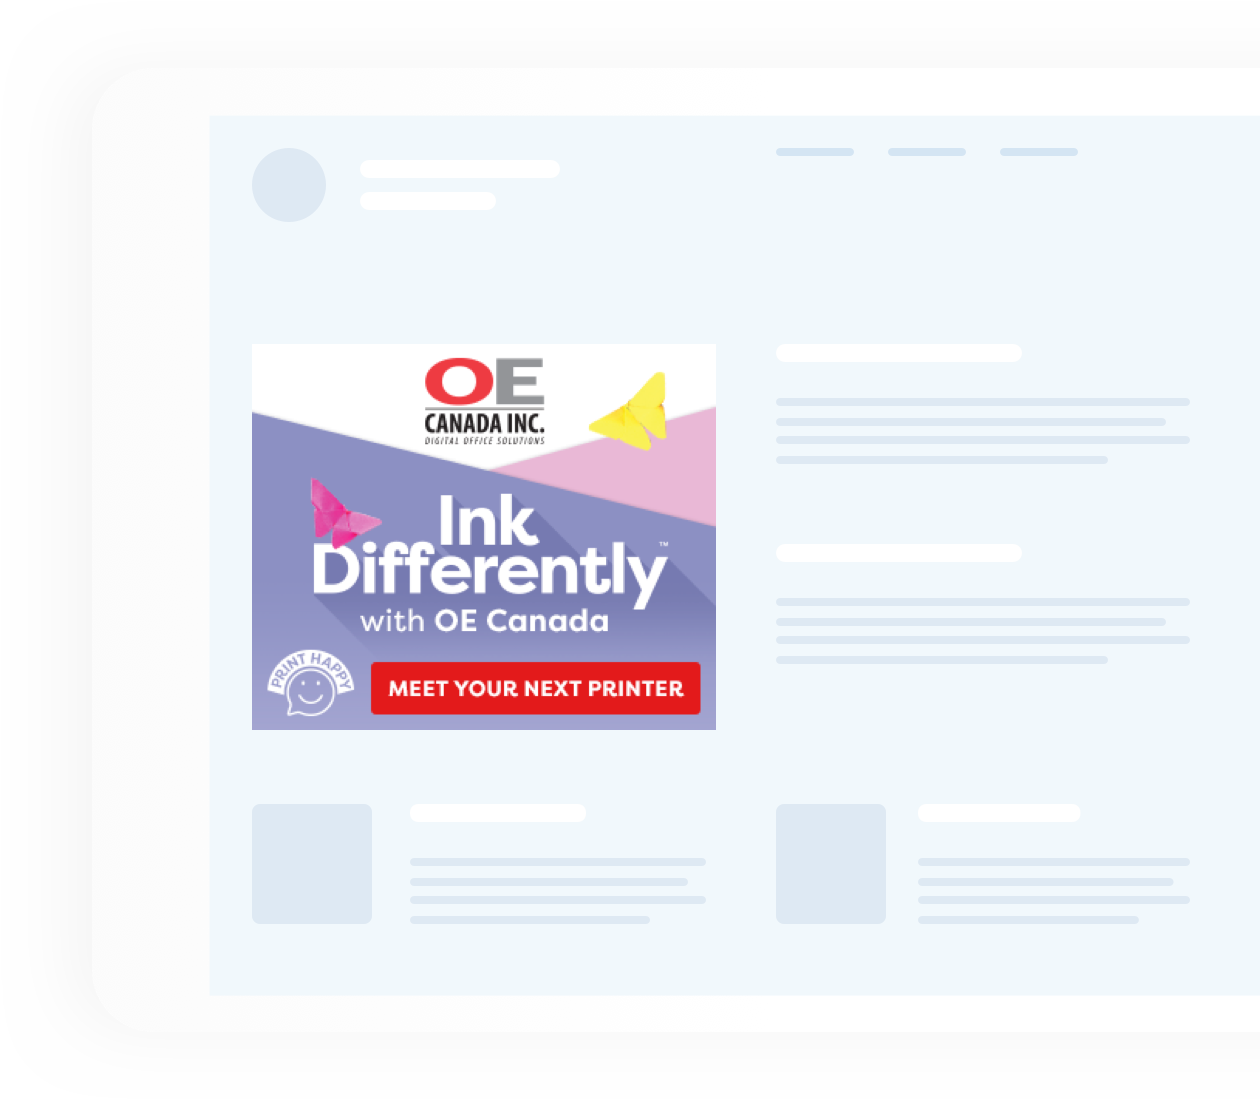 Ink Differently OE Canada Advertisement on a website template